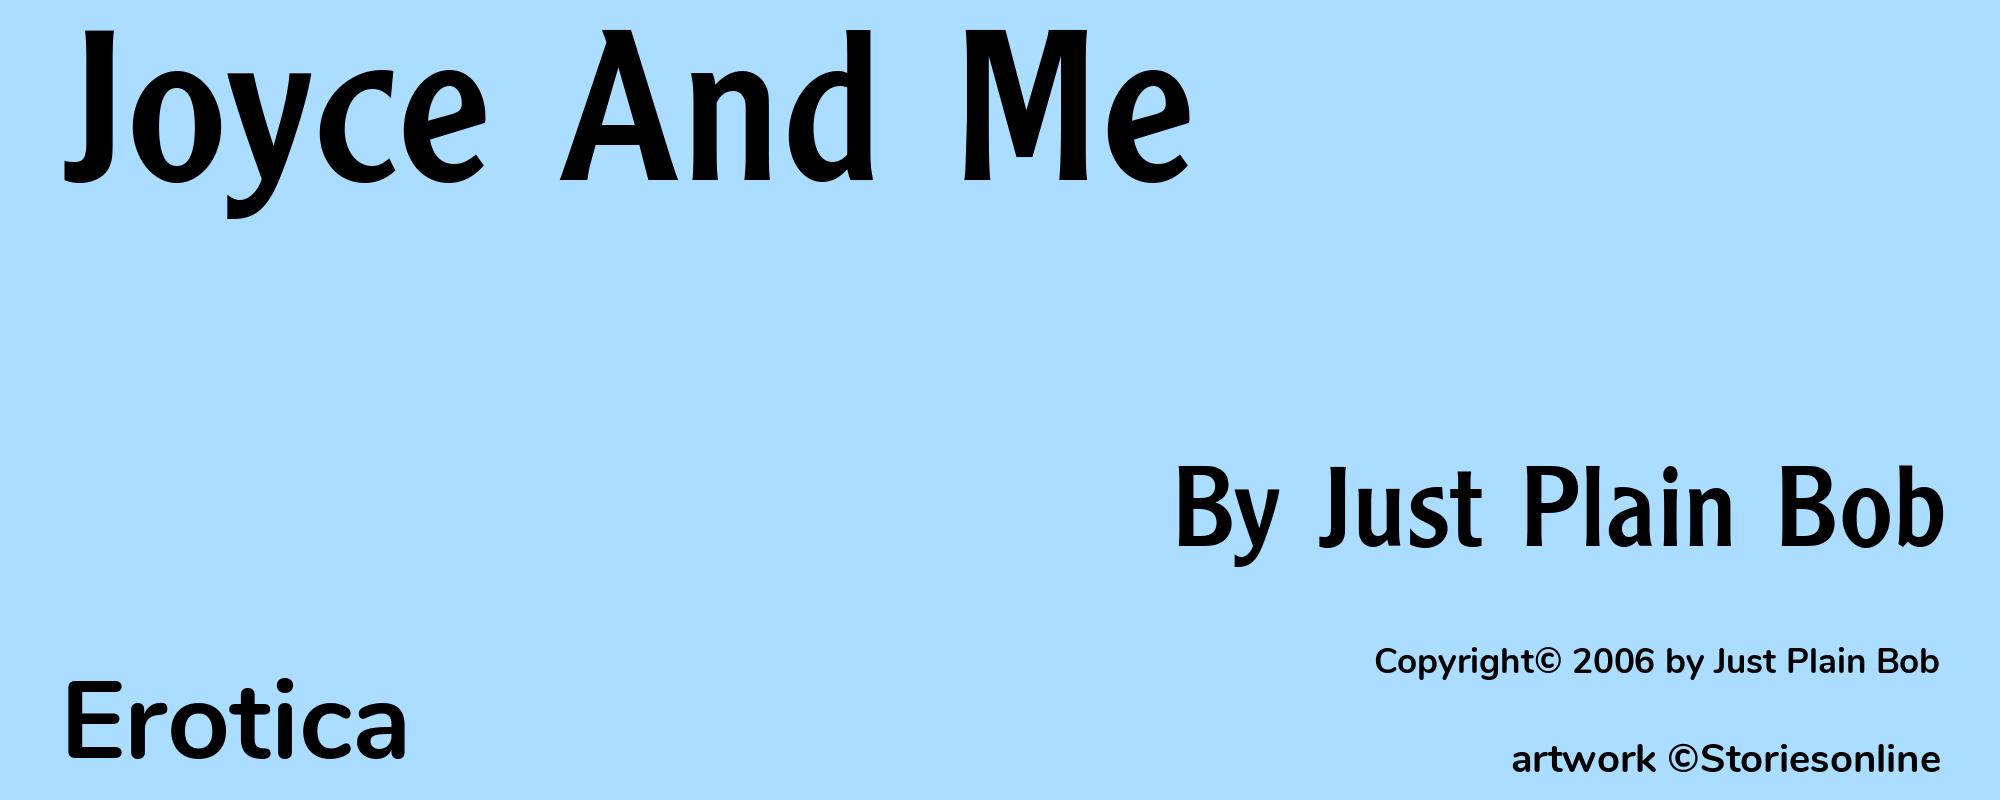 Joyce And Me - Cover